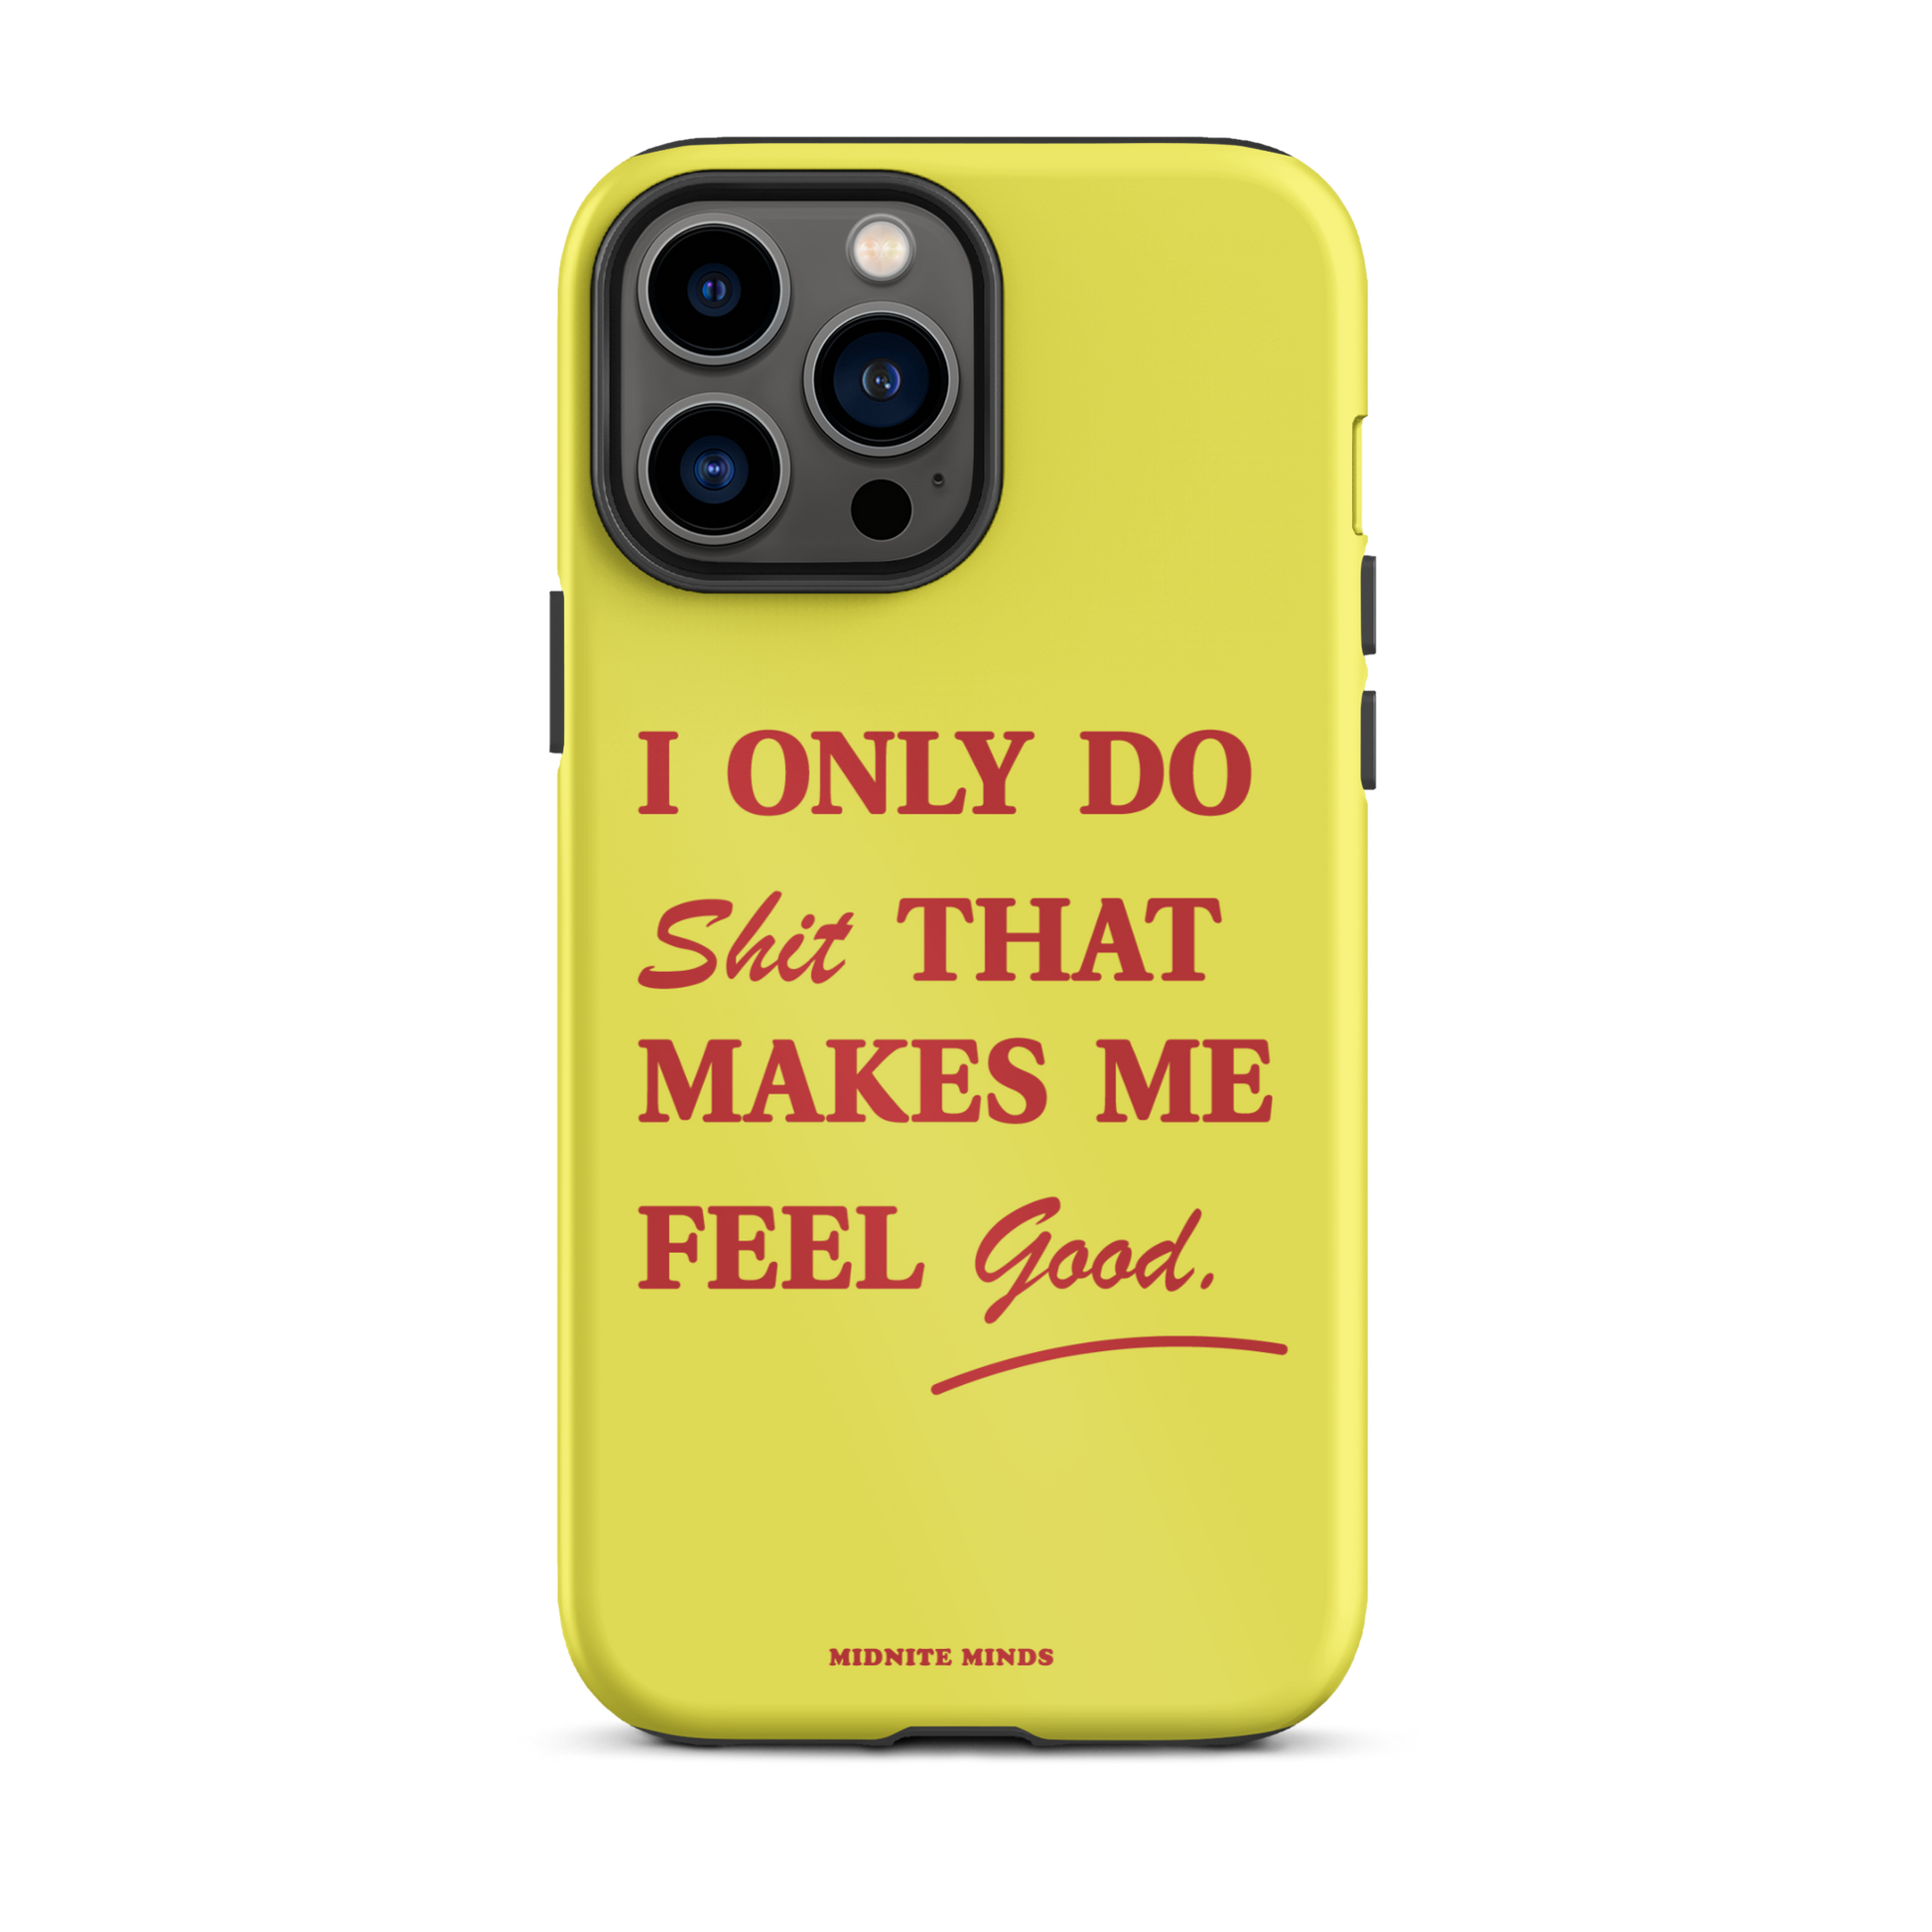 feel good iphone case, yellow iphone case, cute iphone case, phone case for women